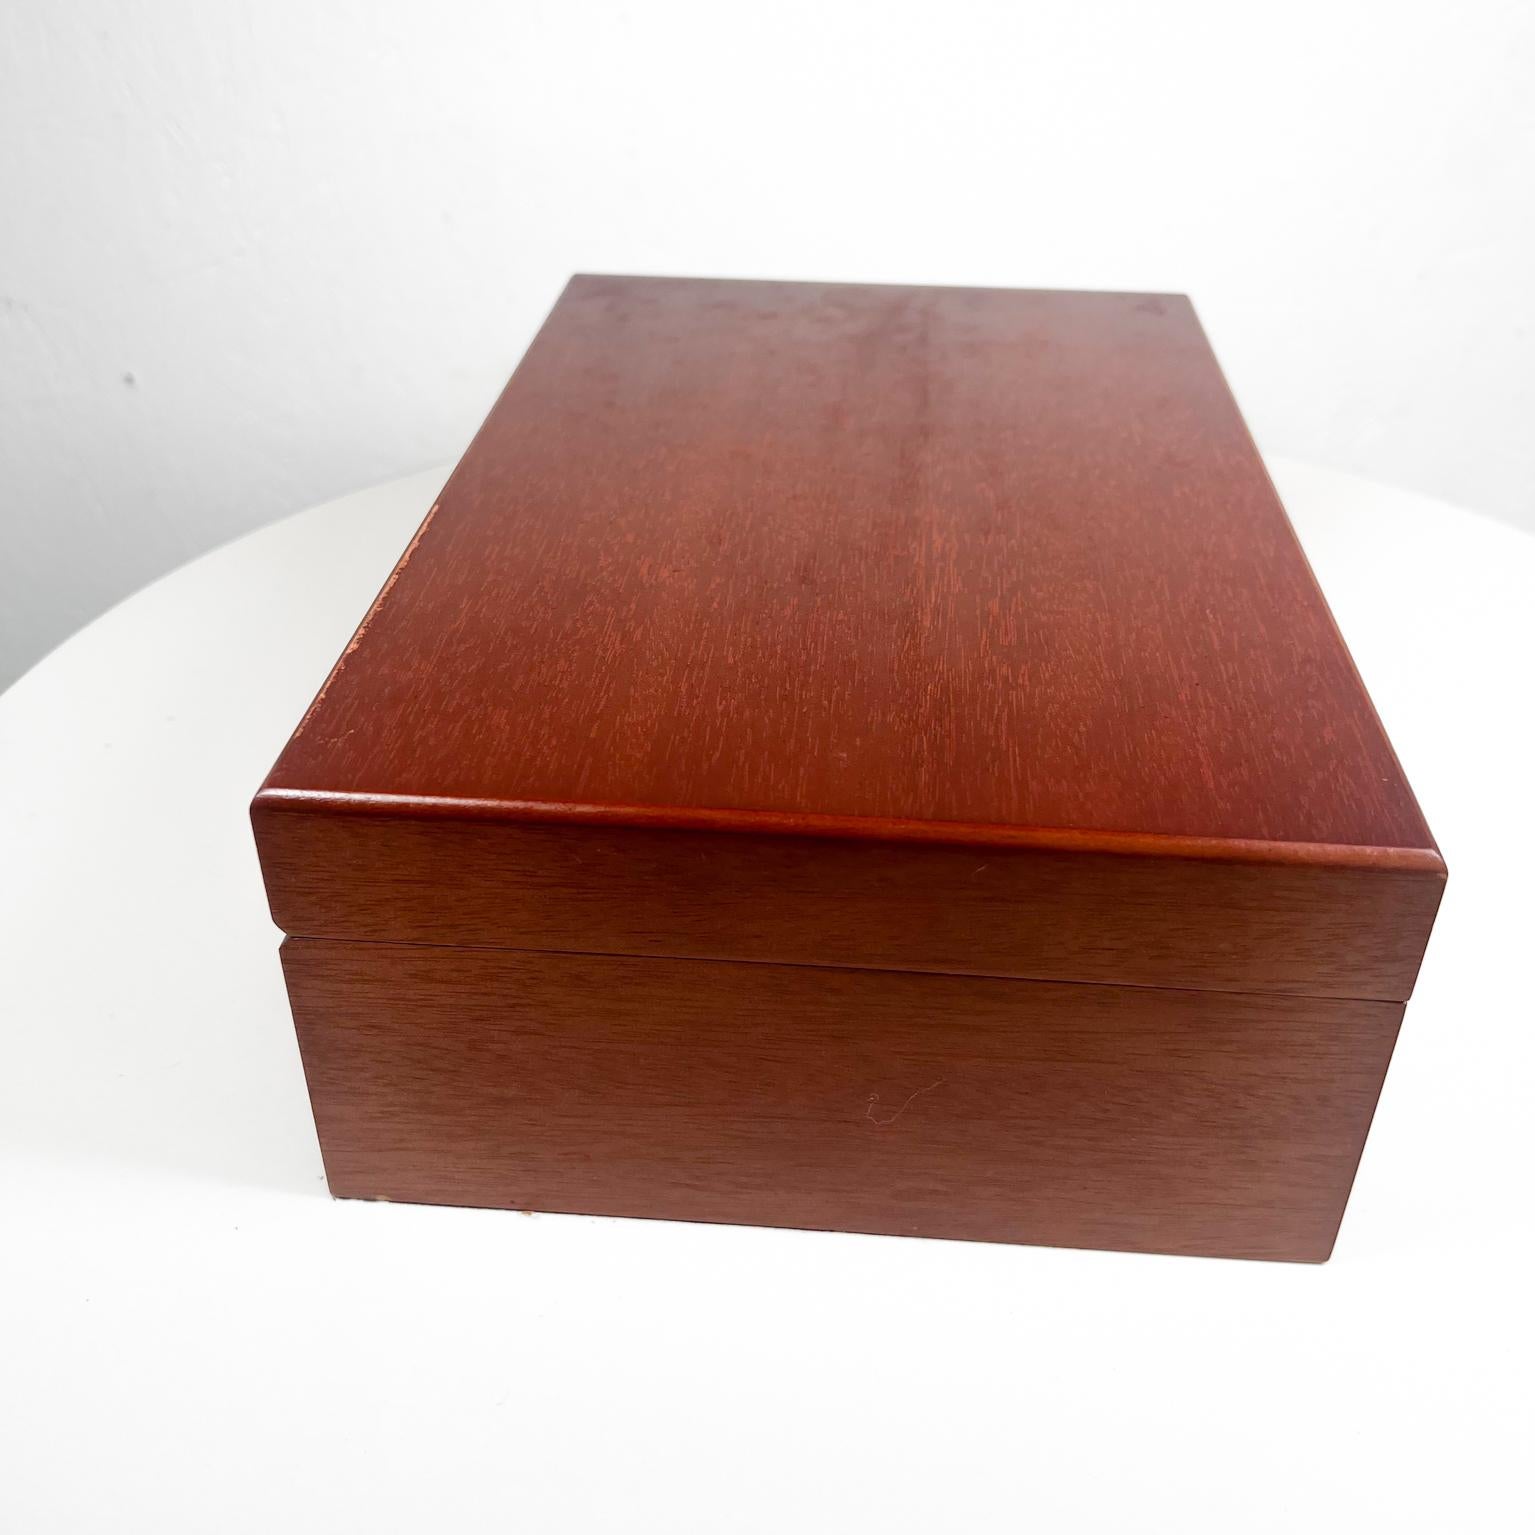 20th Century 1950s Modern Wood Jewelry Box Felt Sectioned Interior Compartments